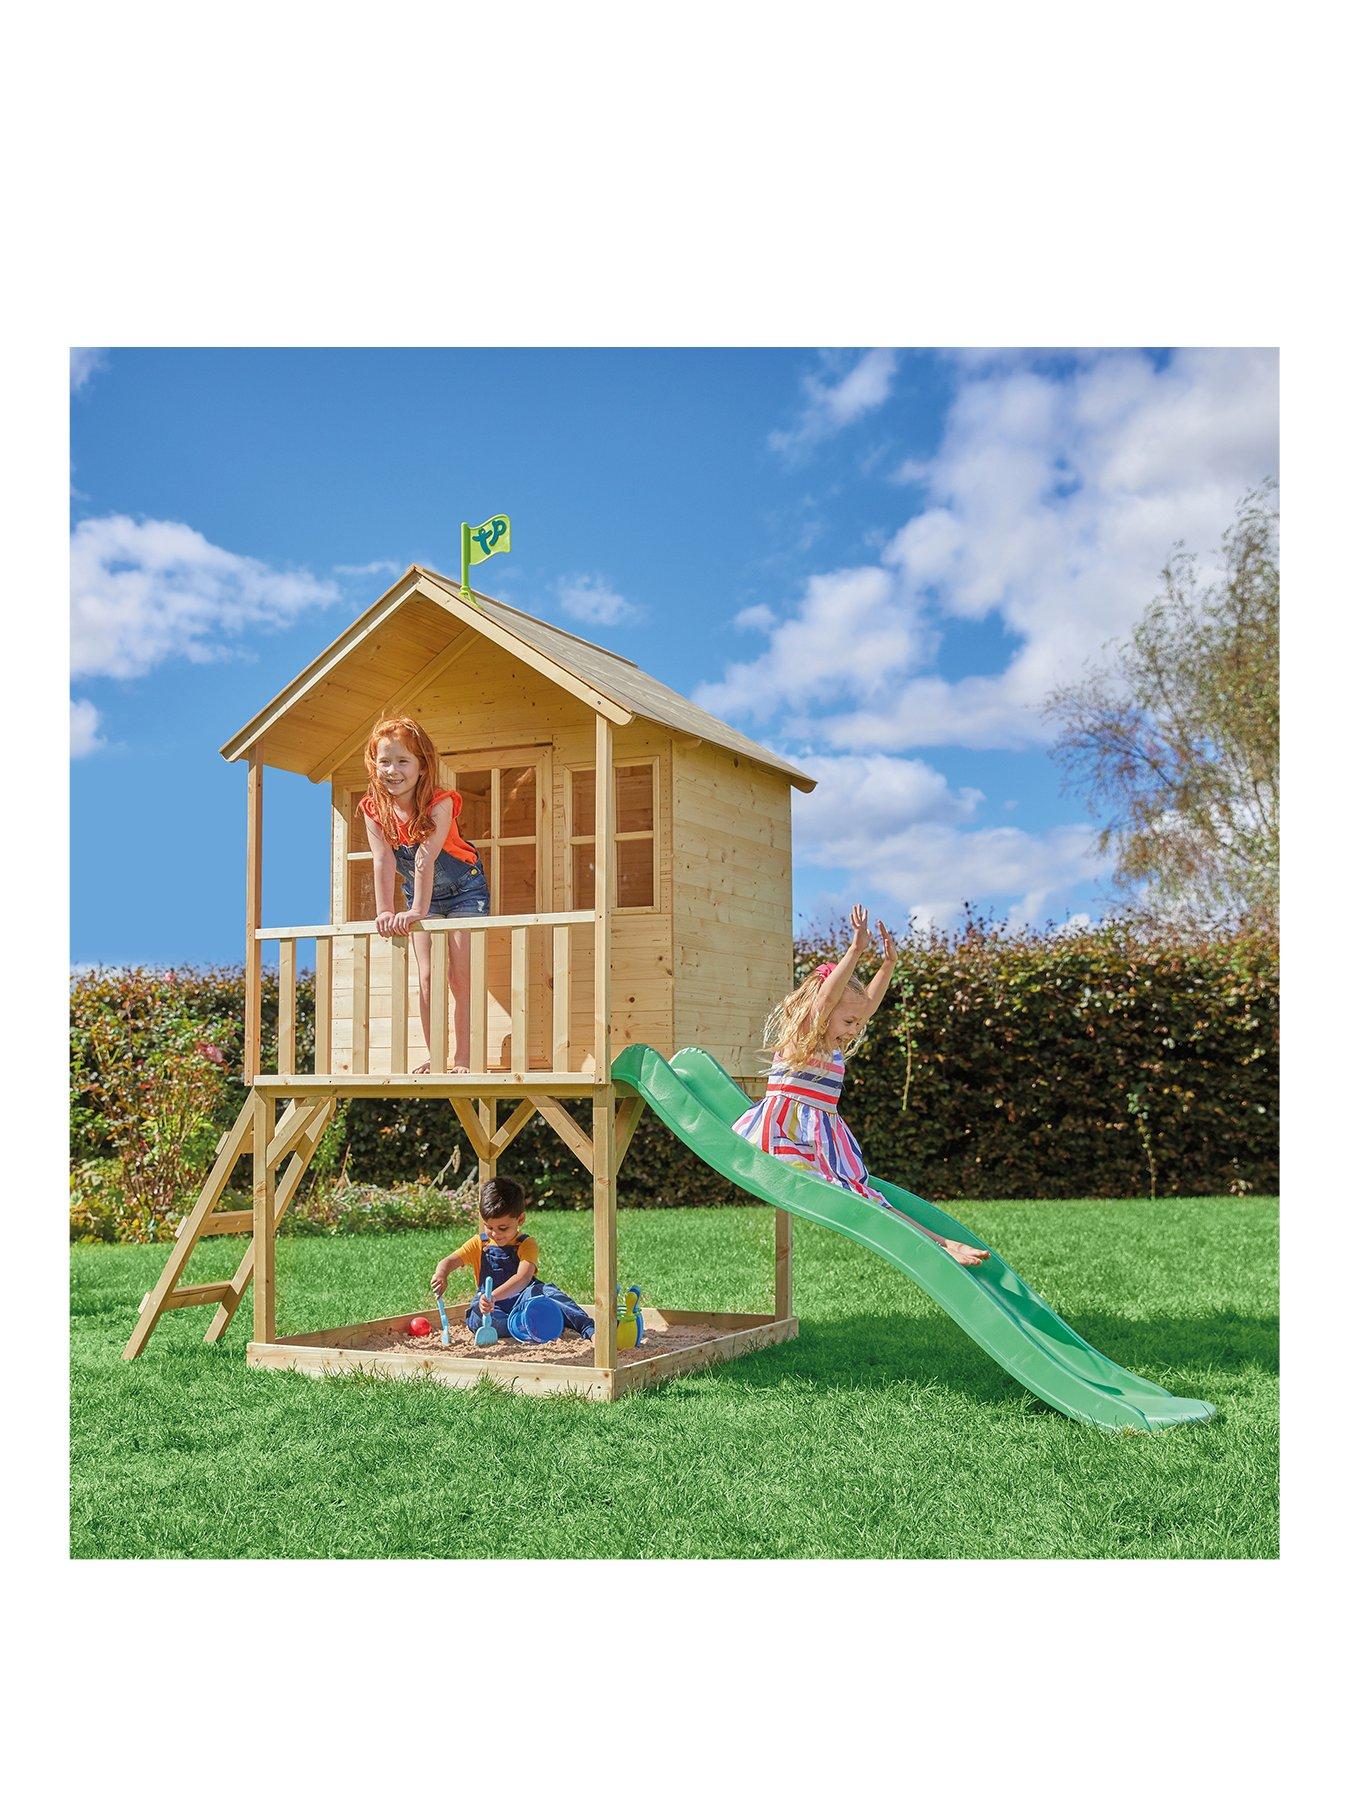 tp treetops wooden tower playhouse